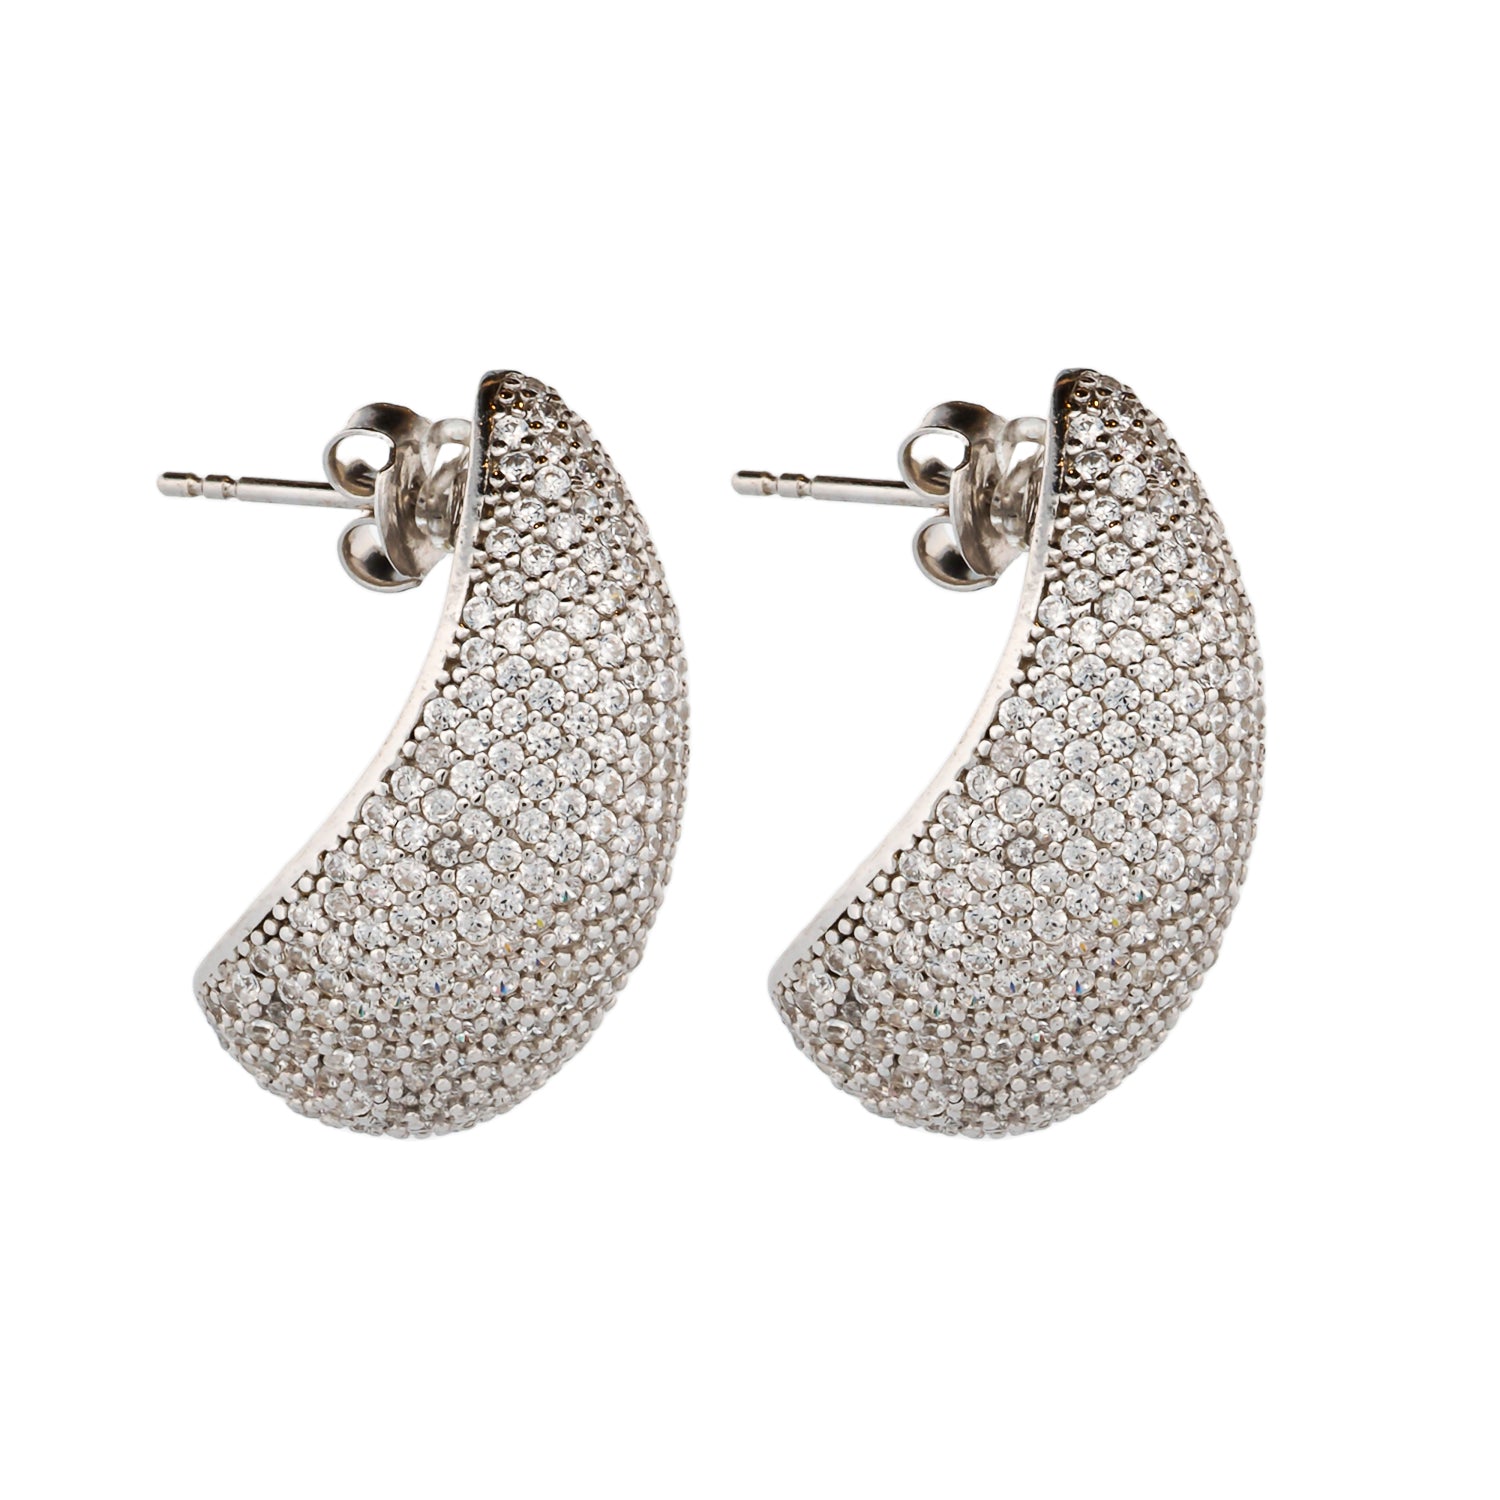 Captivating Sparkle in Contemporary Diamond Fashion Earrings